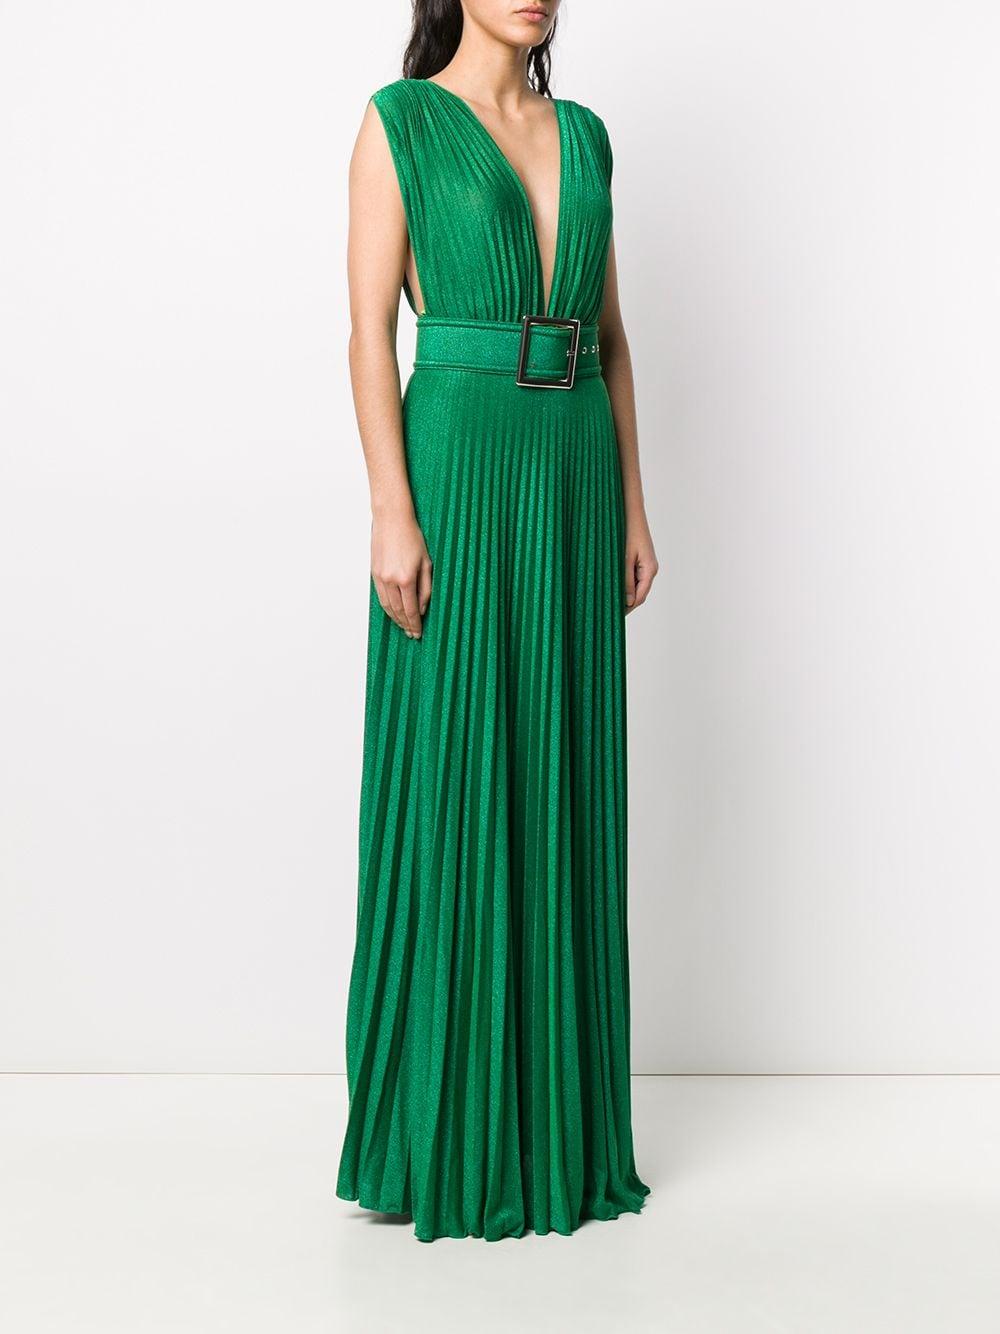 Elisabetta Franchi Synthetic Pleated Sleeveless Gown in Green - Lyst